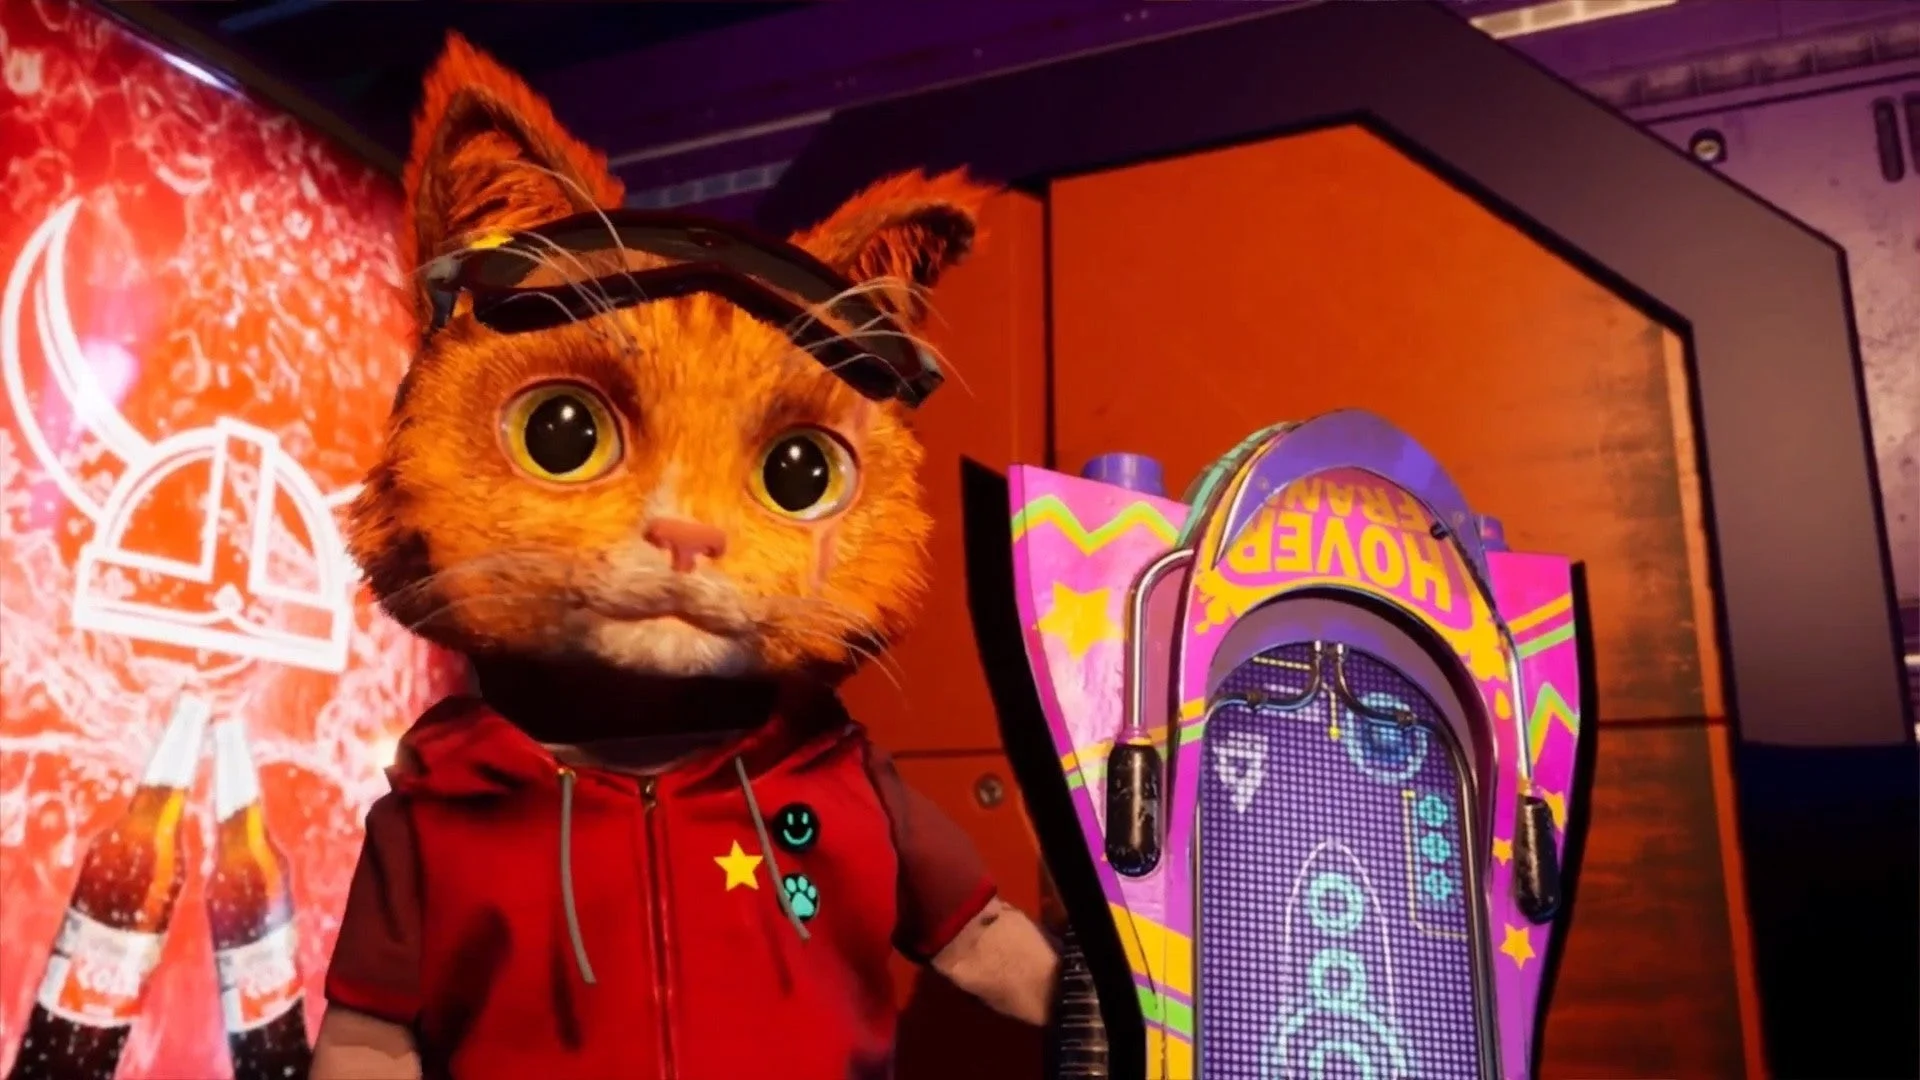 The trailer for Gori: Cuddly Carnage, a brutal slasher about a tough cat on a hoverboard, has been shown